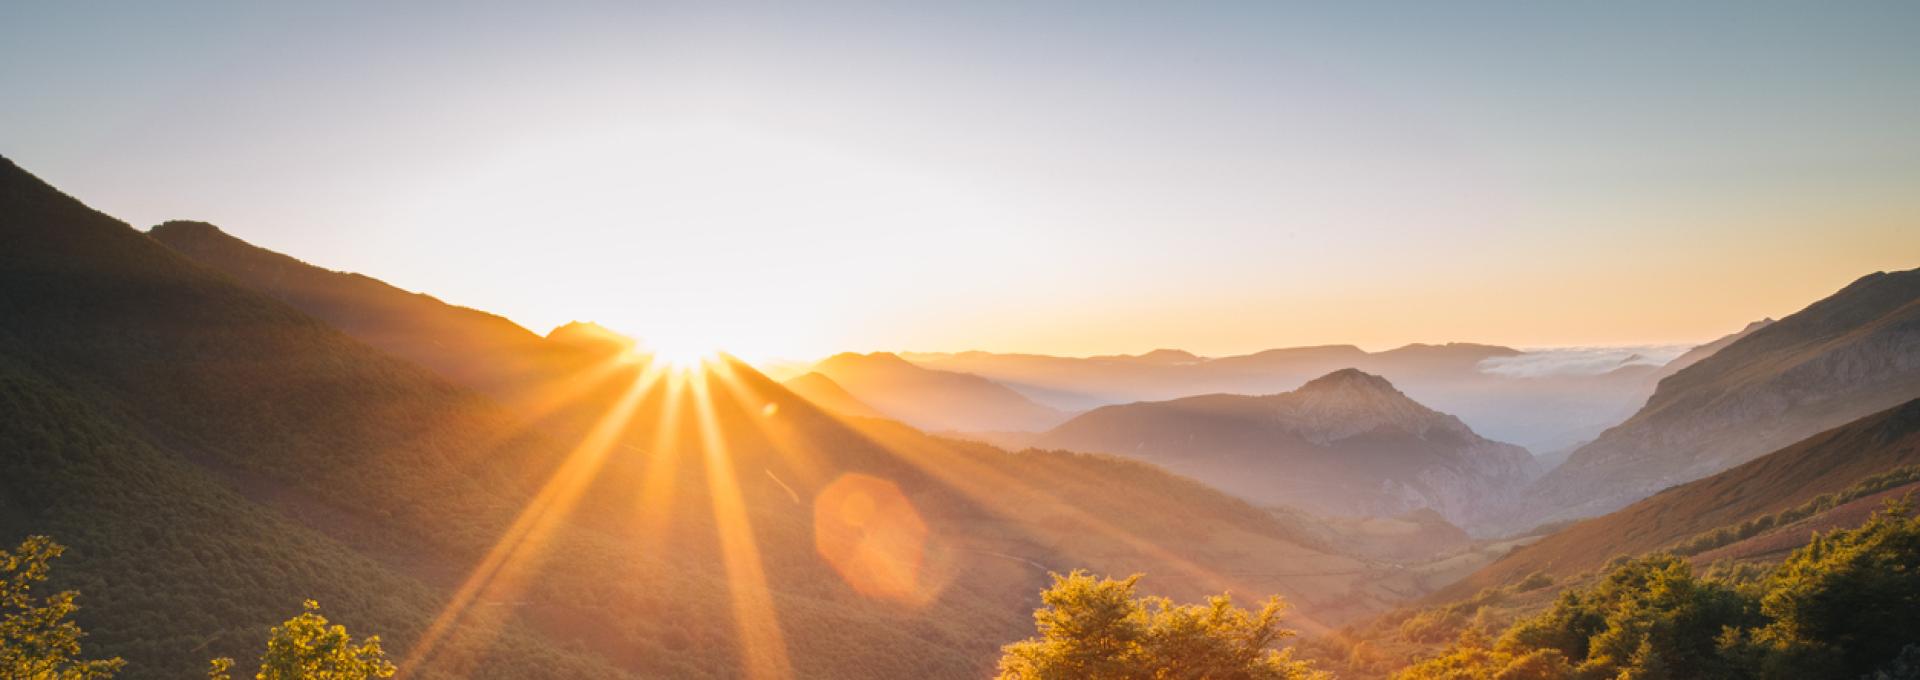 Scenic view of the sun rising over mountains stock photo